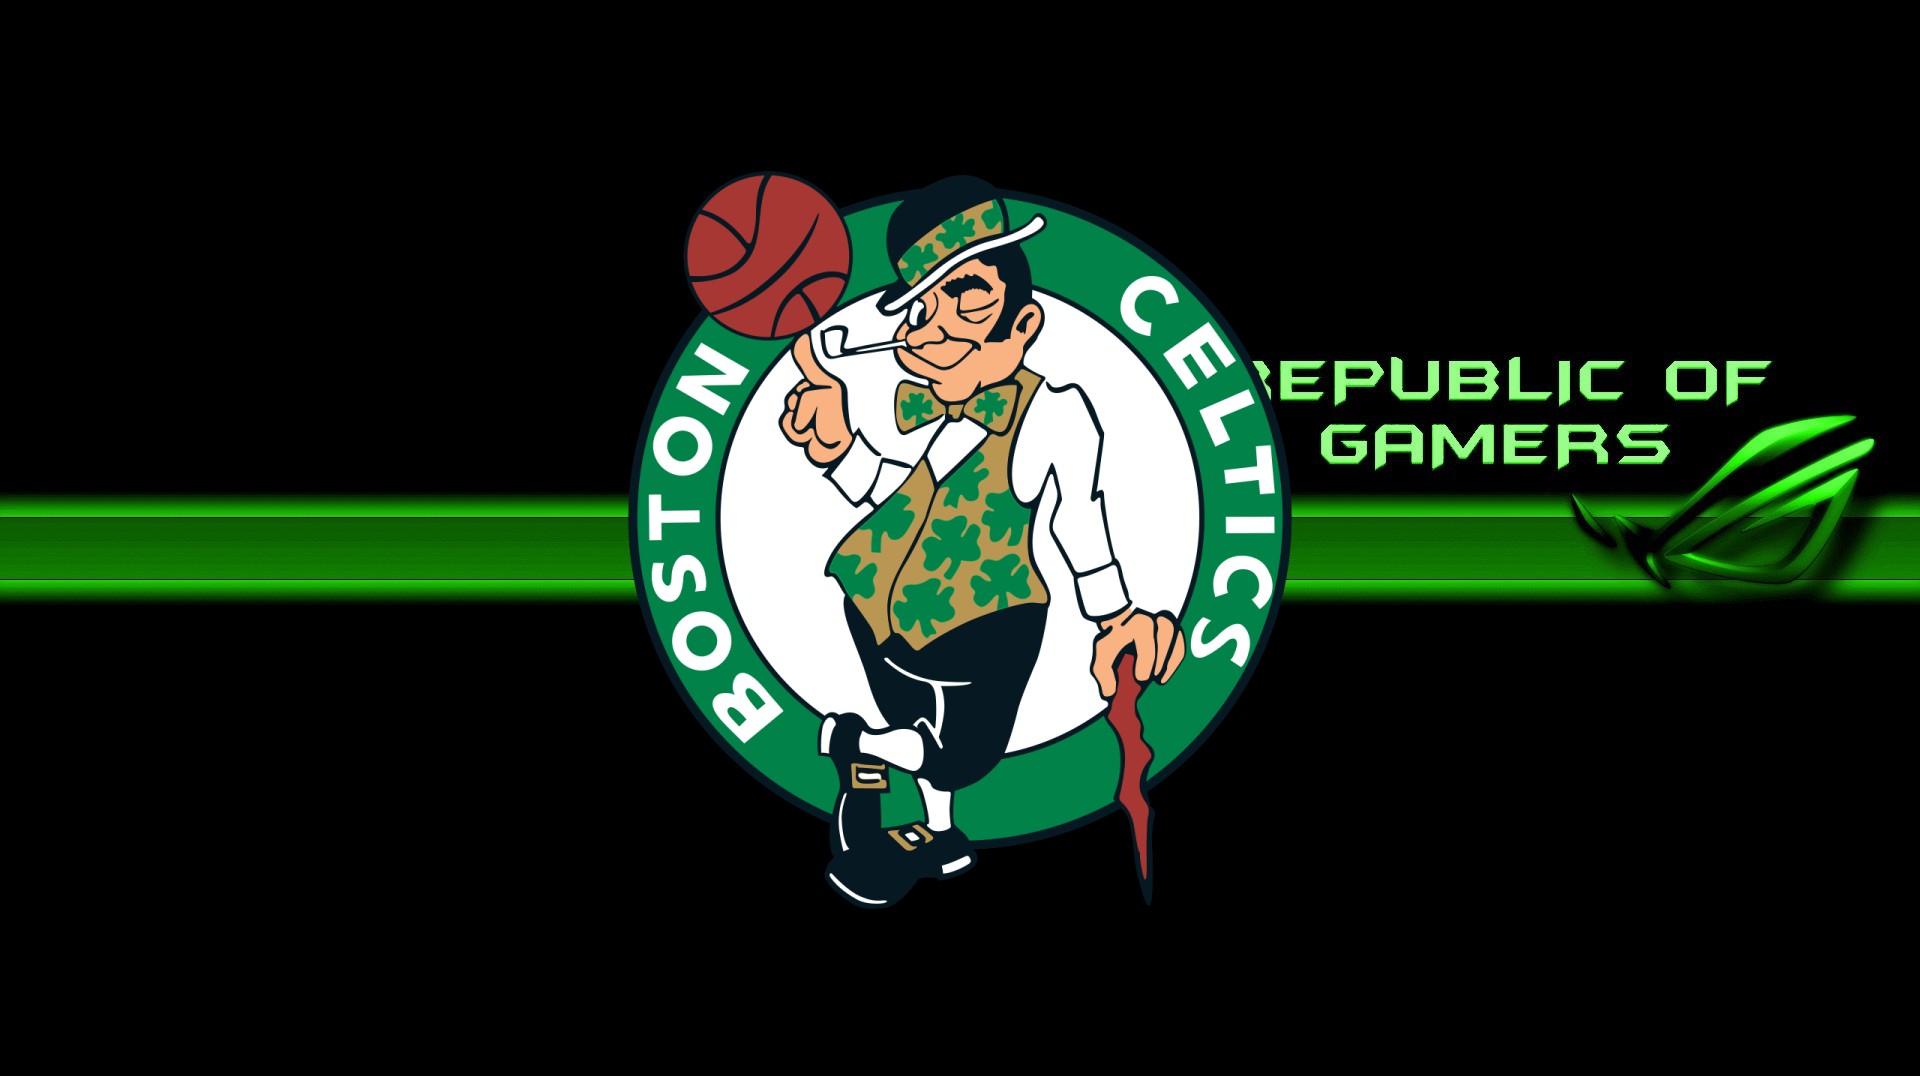 Windows Wallpaper Boston Celtics Logo with image dimensions 1920x1080 pixel. You can make this wallpaper for your Desktop Computer Backgrounds, Windows or Mac Screensavers, iPhone Lock screen, Tablet or Android and another Mobile Phone device